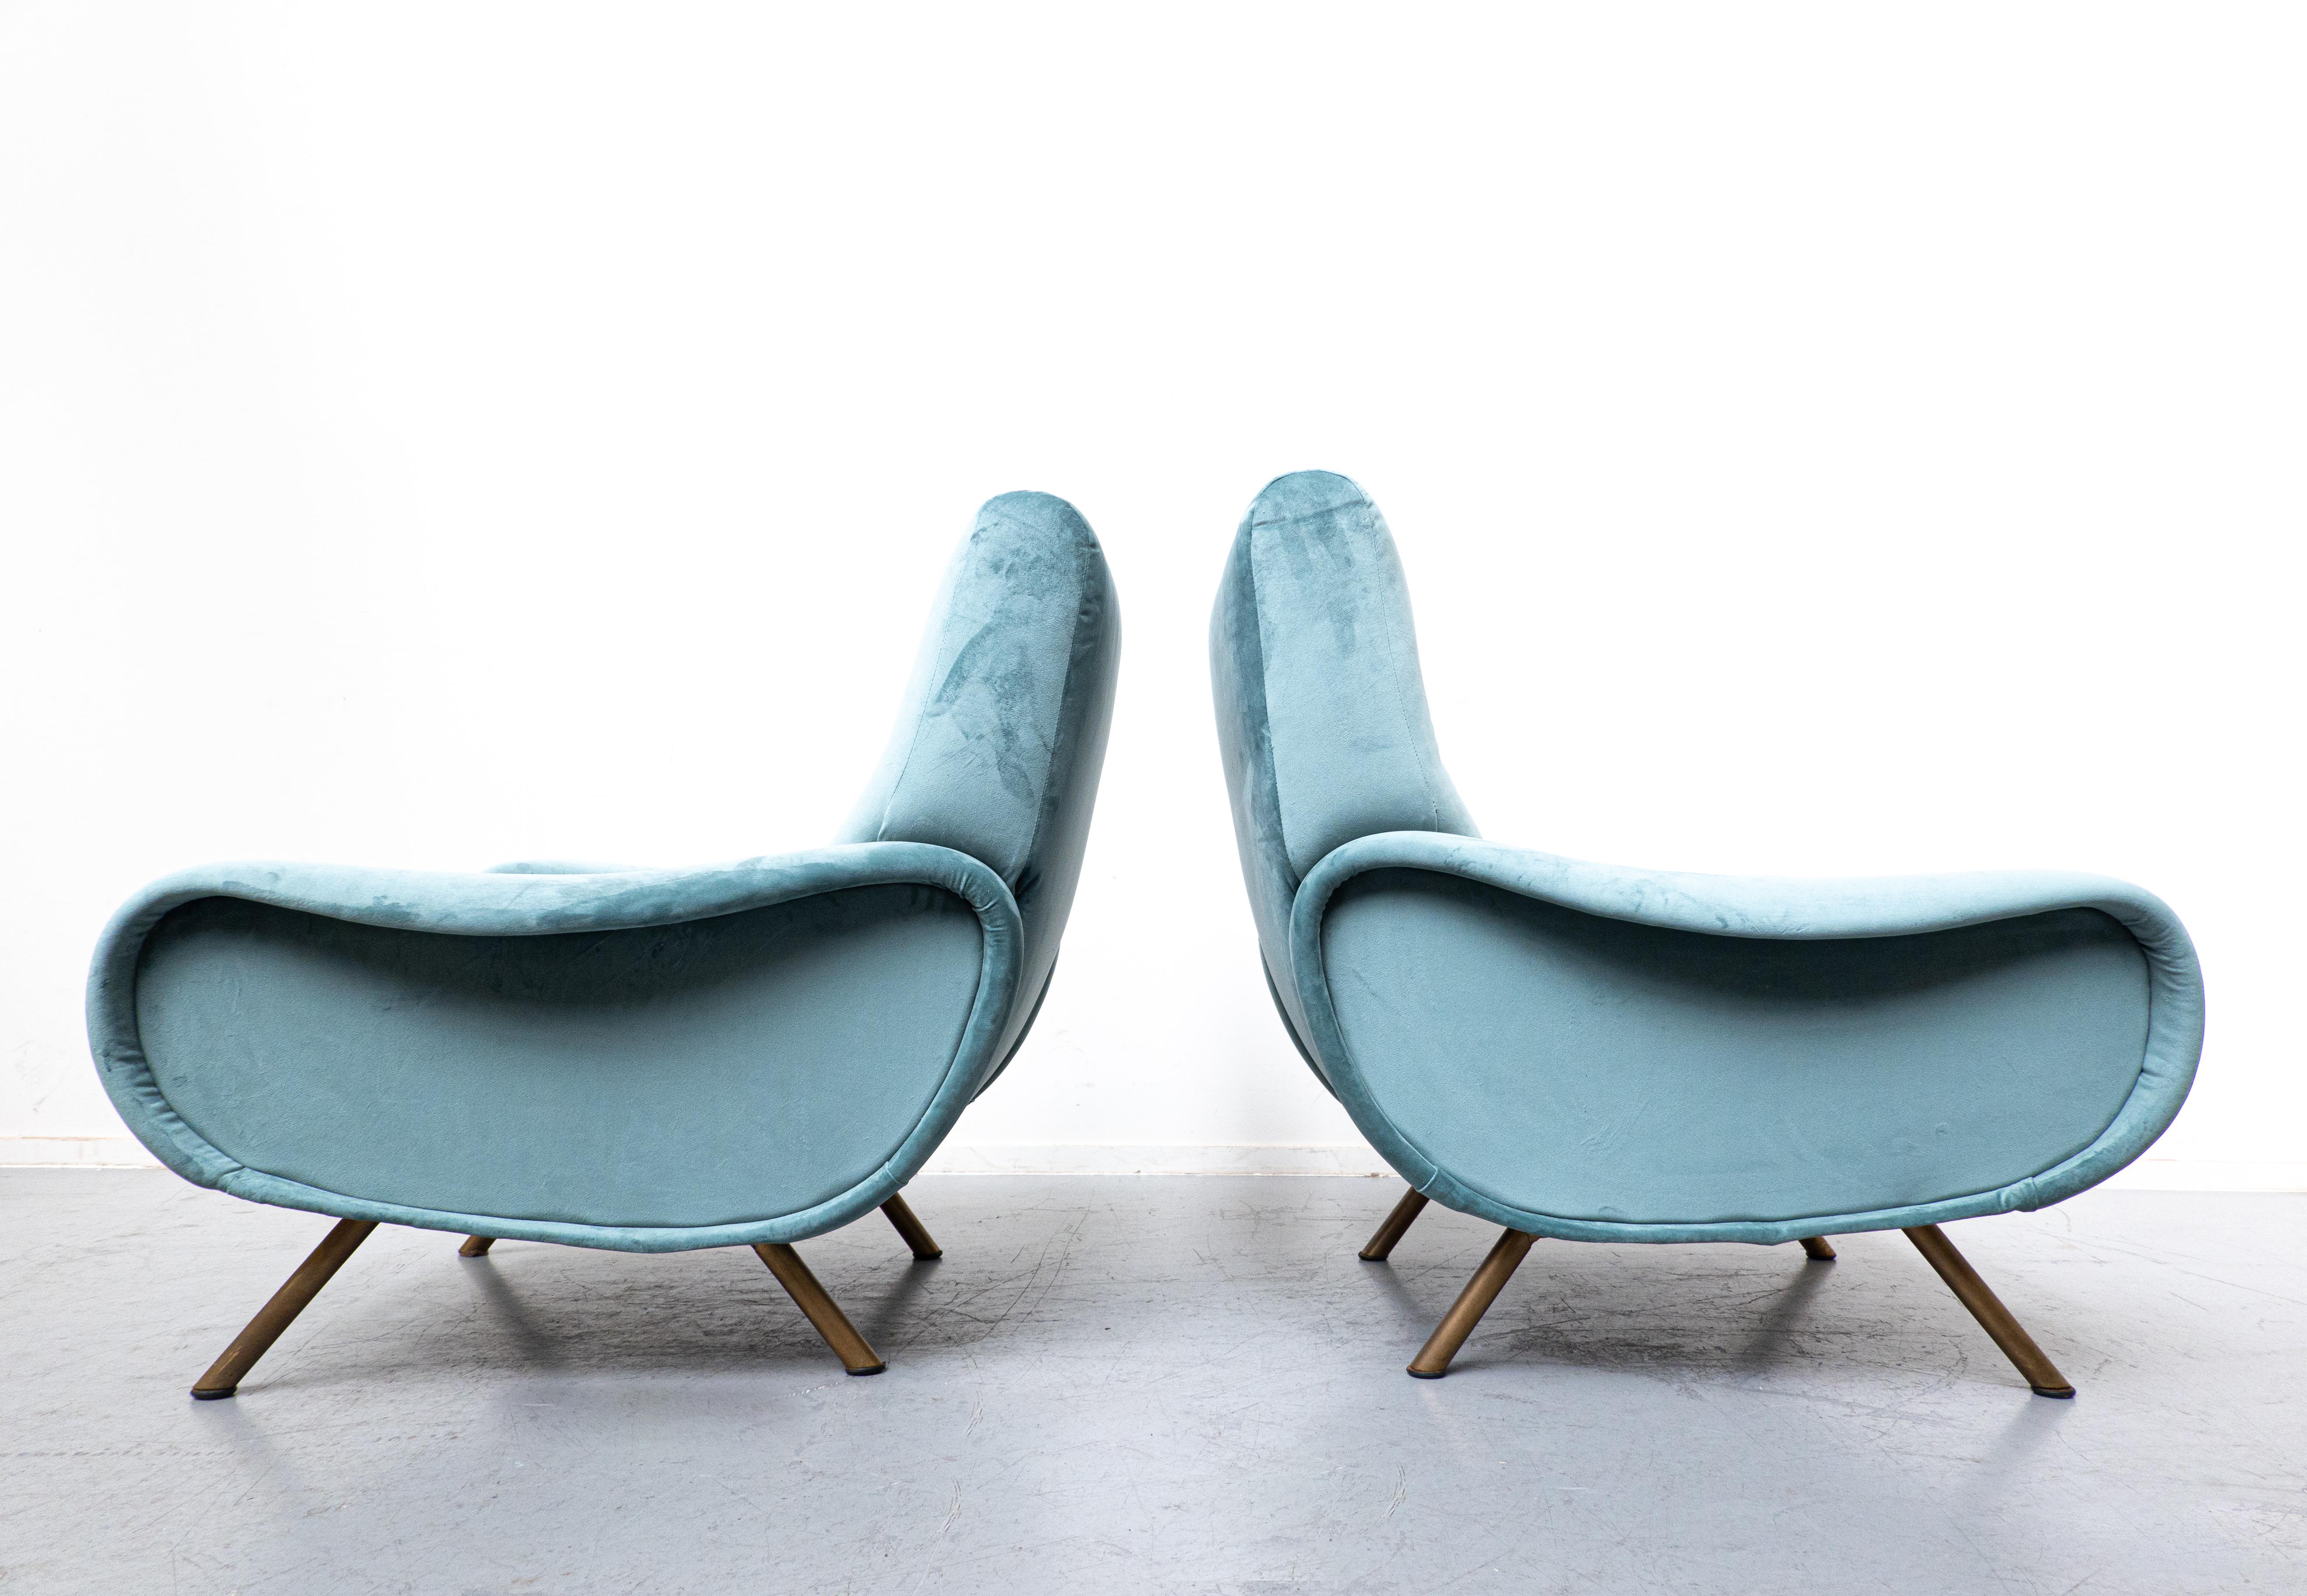 Mid-Century Modern pair of blue armchairs Model Lady by Marco Zanuso, Arflex, 1950s, Italy.

Marco Zanuso (1916-2001) was a very important Italian designer. He had a major influence on the world of design. Nowadays his work can be found in museums